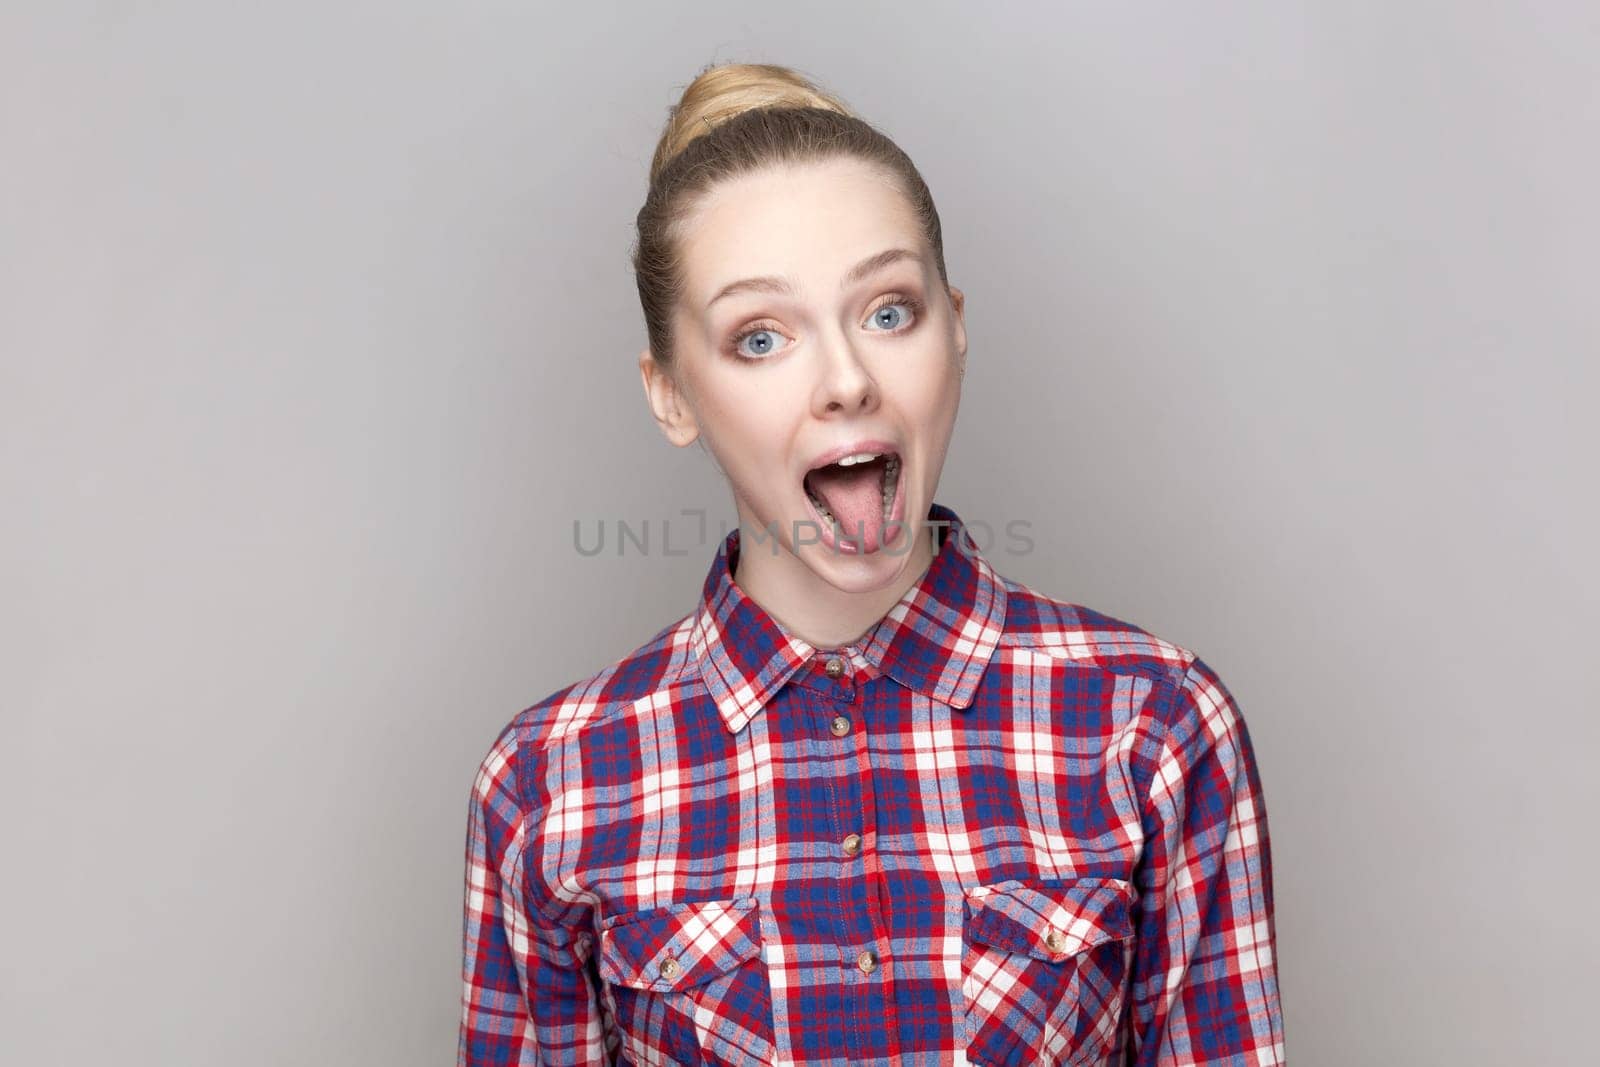 Portrait of foolish crazy playful woman with bun hairstyle looking at camera with open mouth and showing tongue out, wearing checkered shirt. Indoor studio shot isolated on gray background.